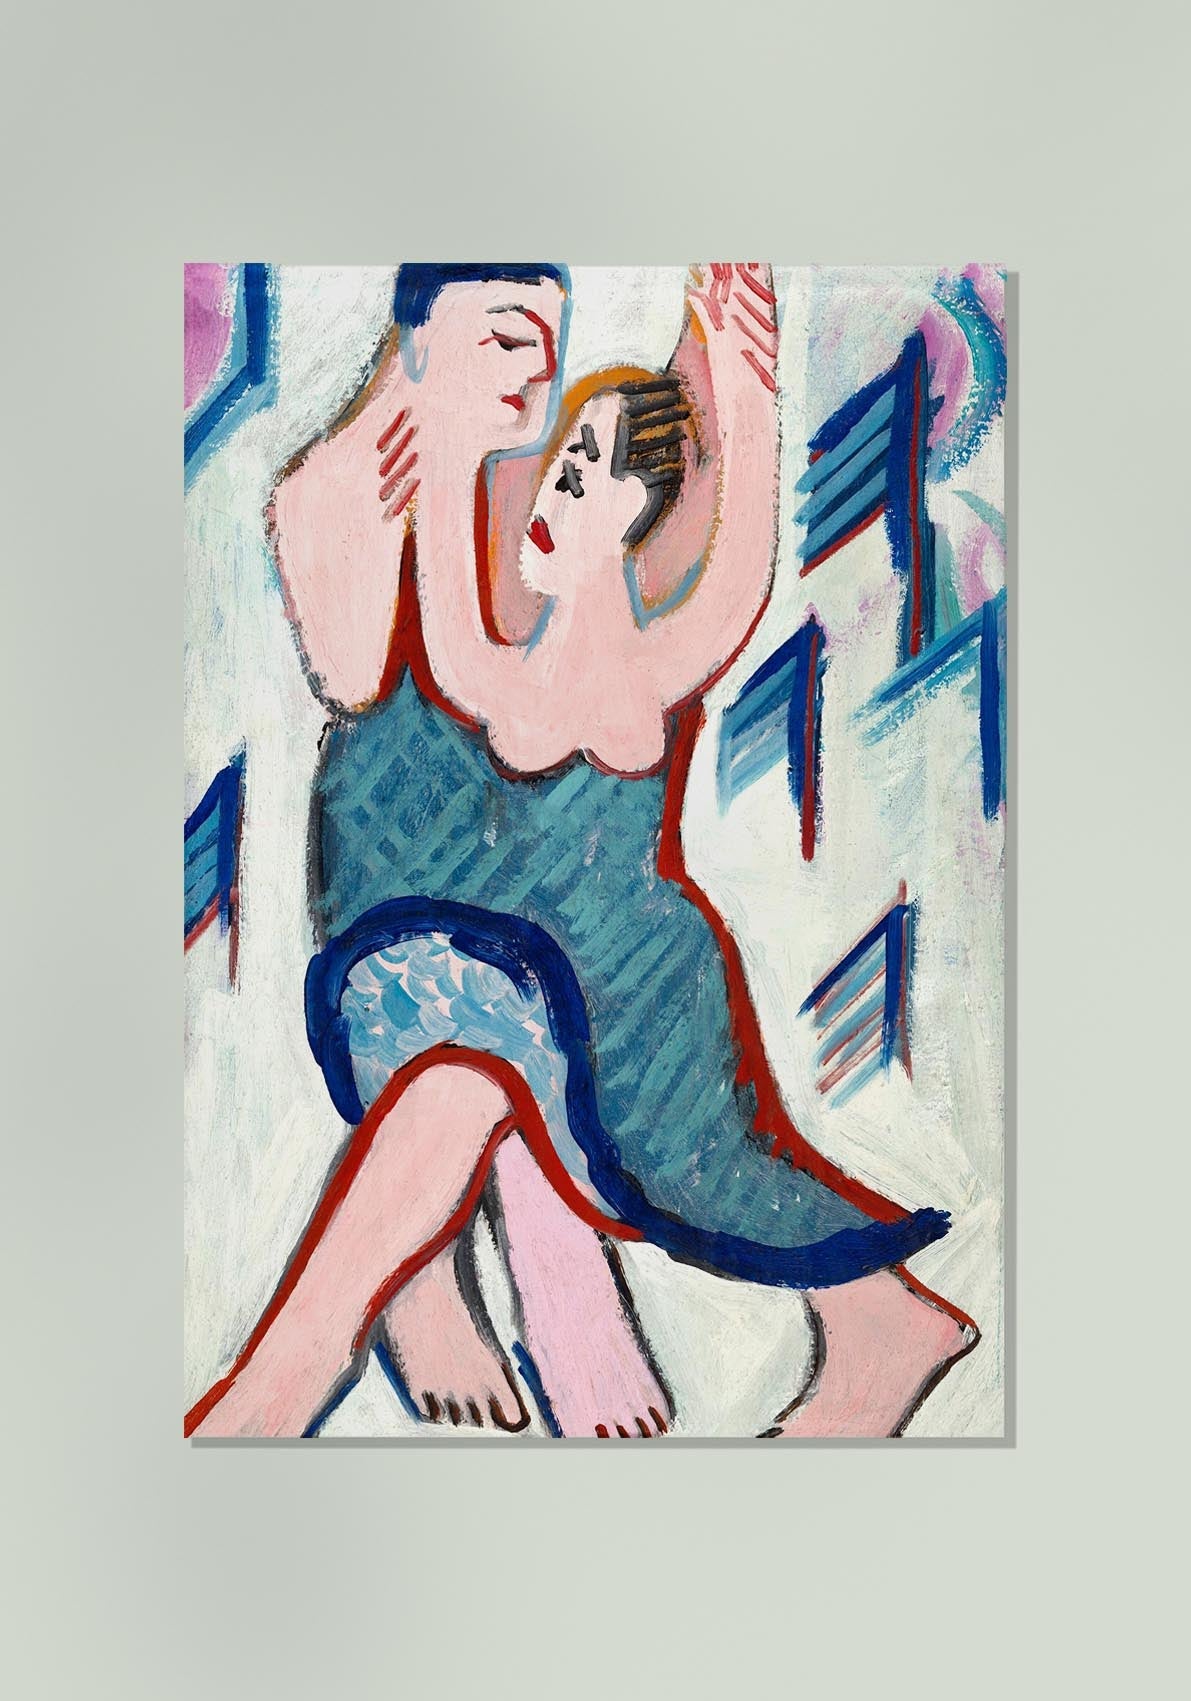 Dancing Couple in the Snow  by Ernst Kirchner